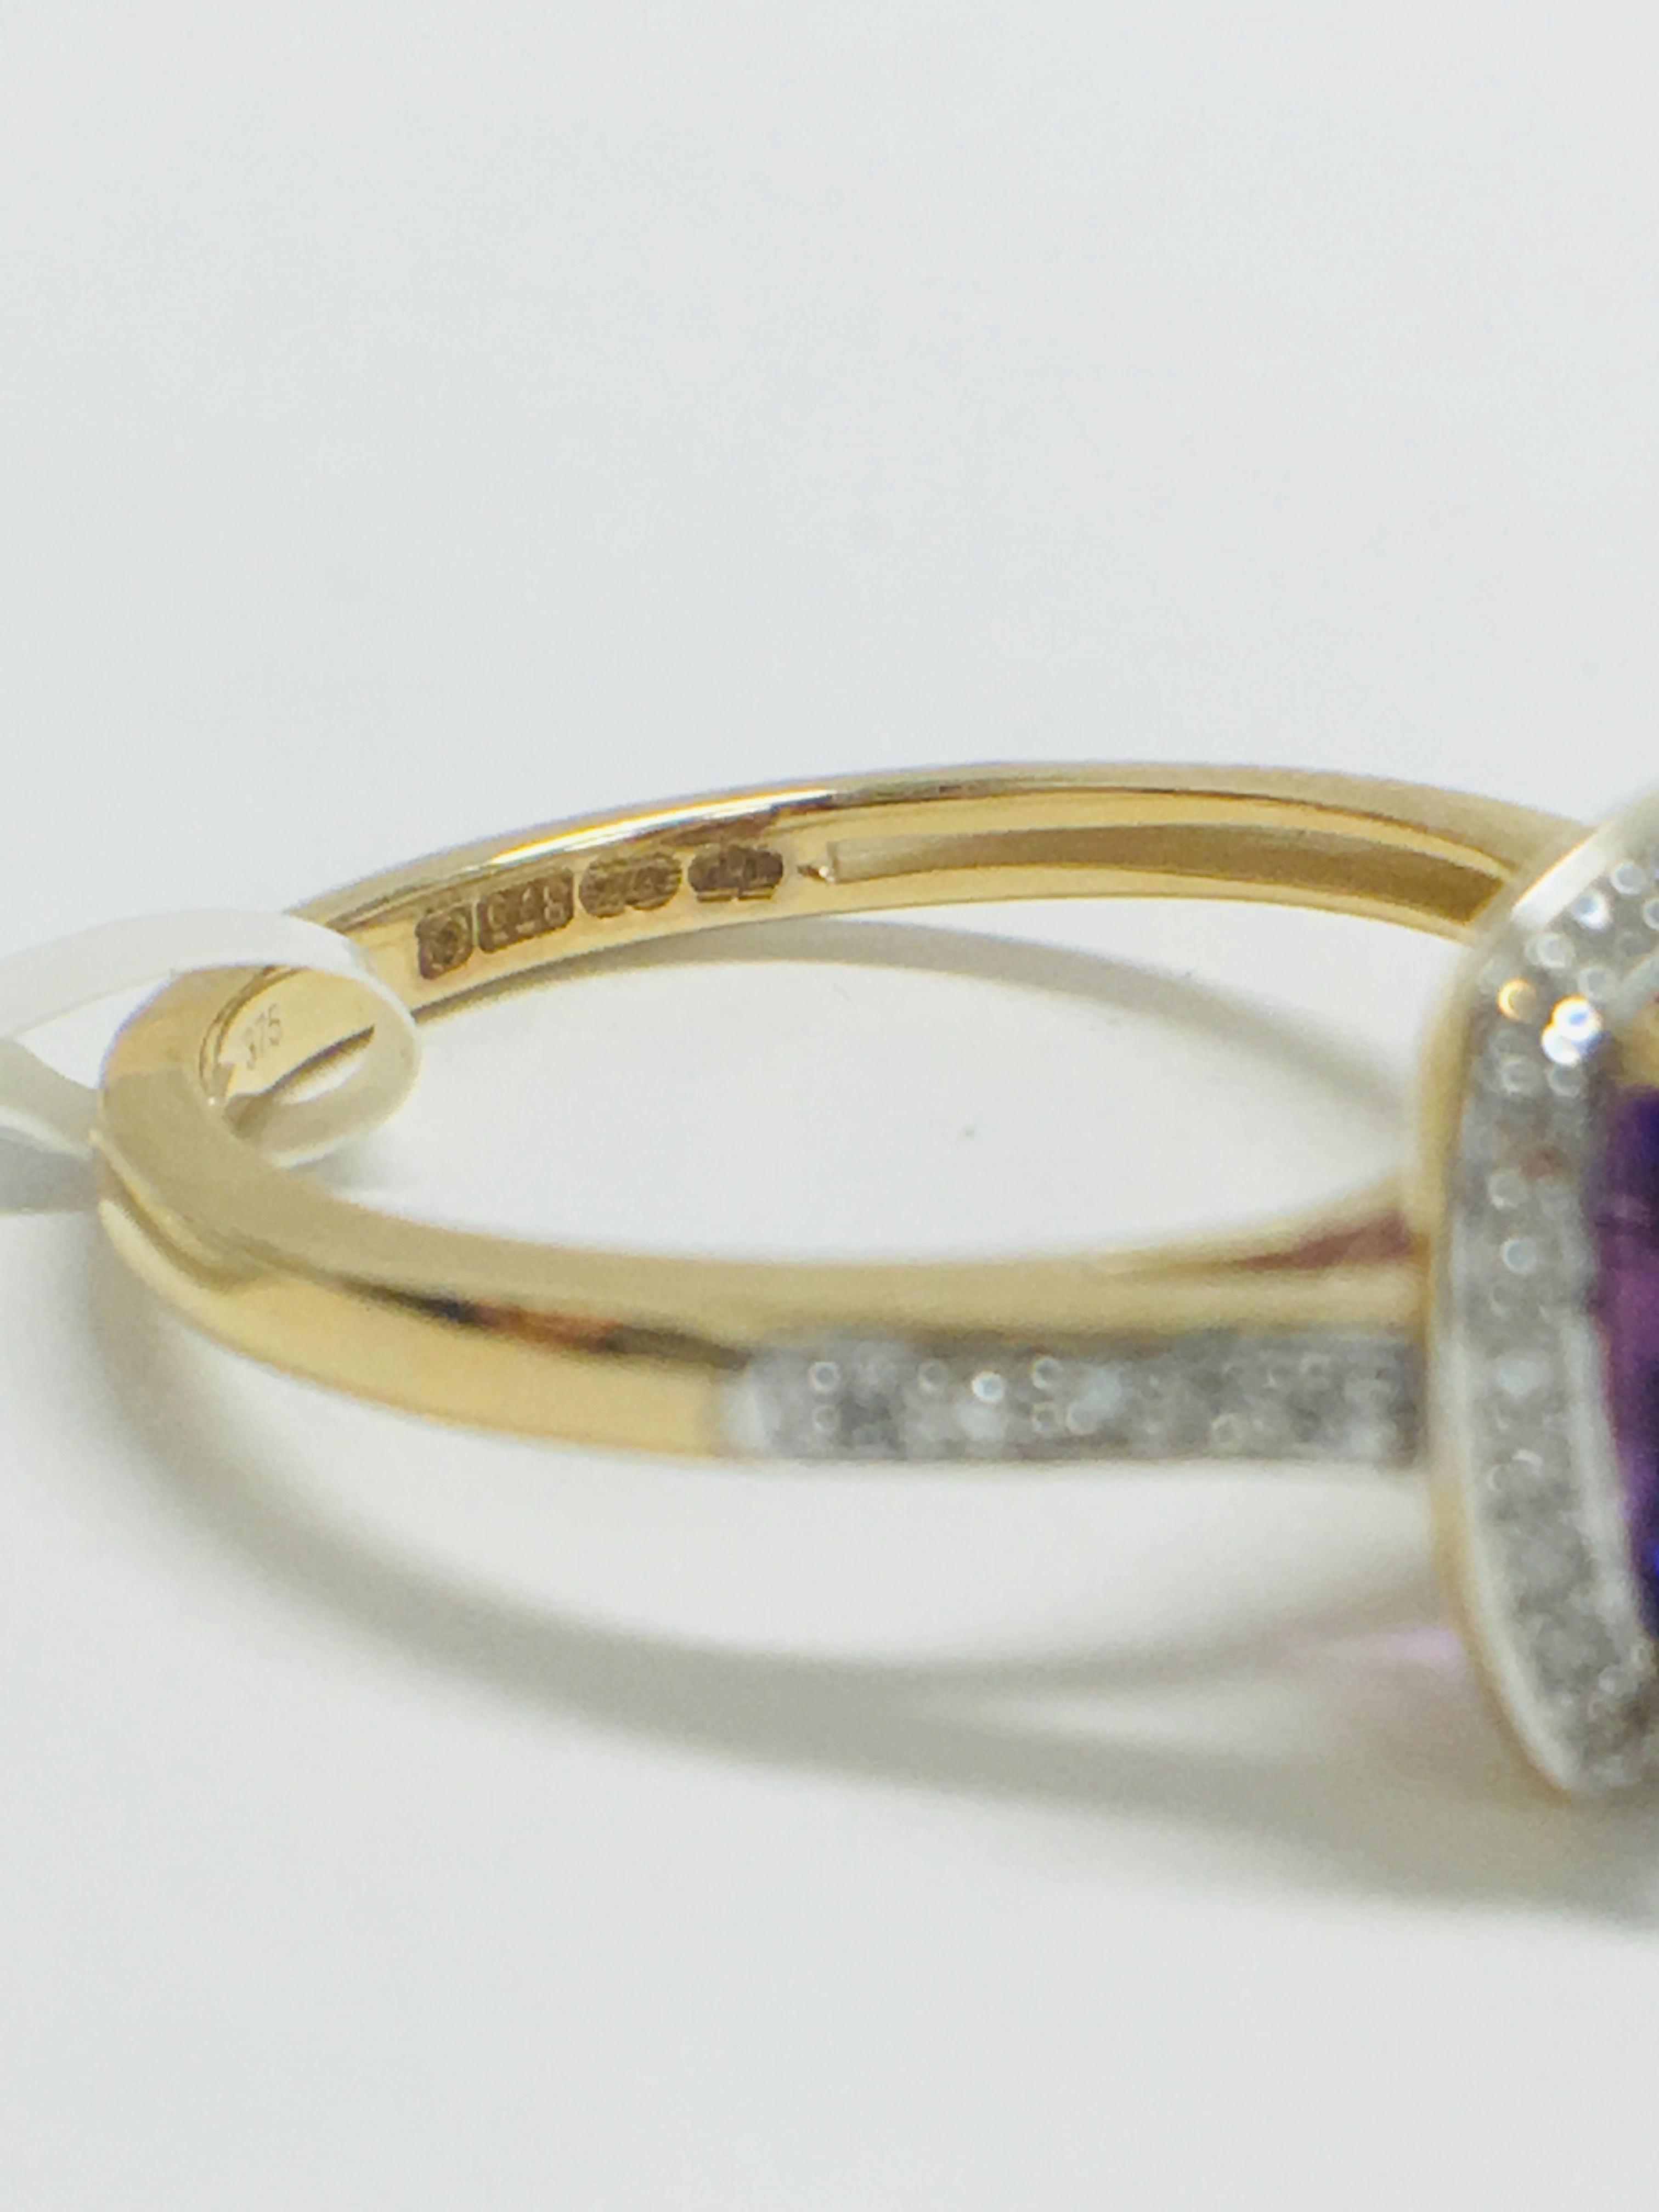 9ct yellow gold Amethyst and diamond ring - Image 9 of 11